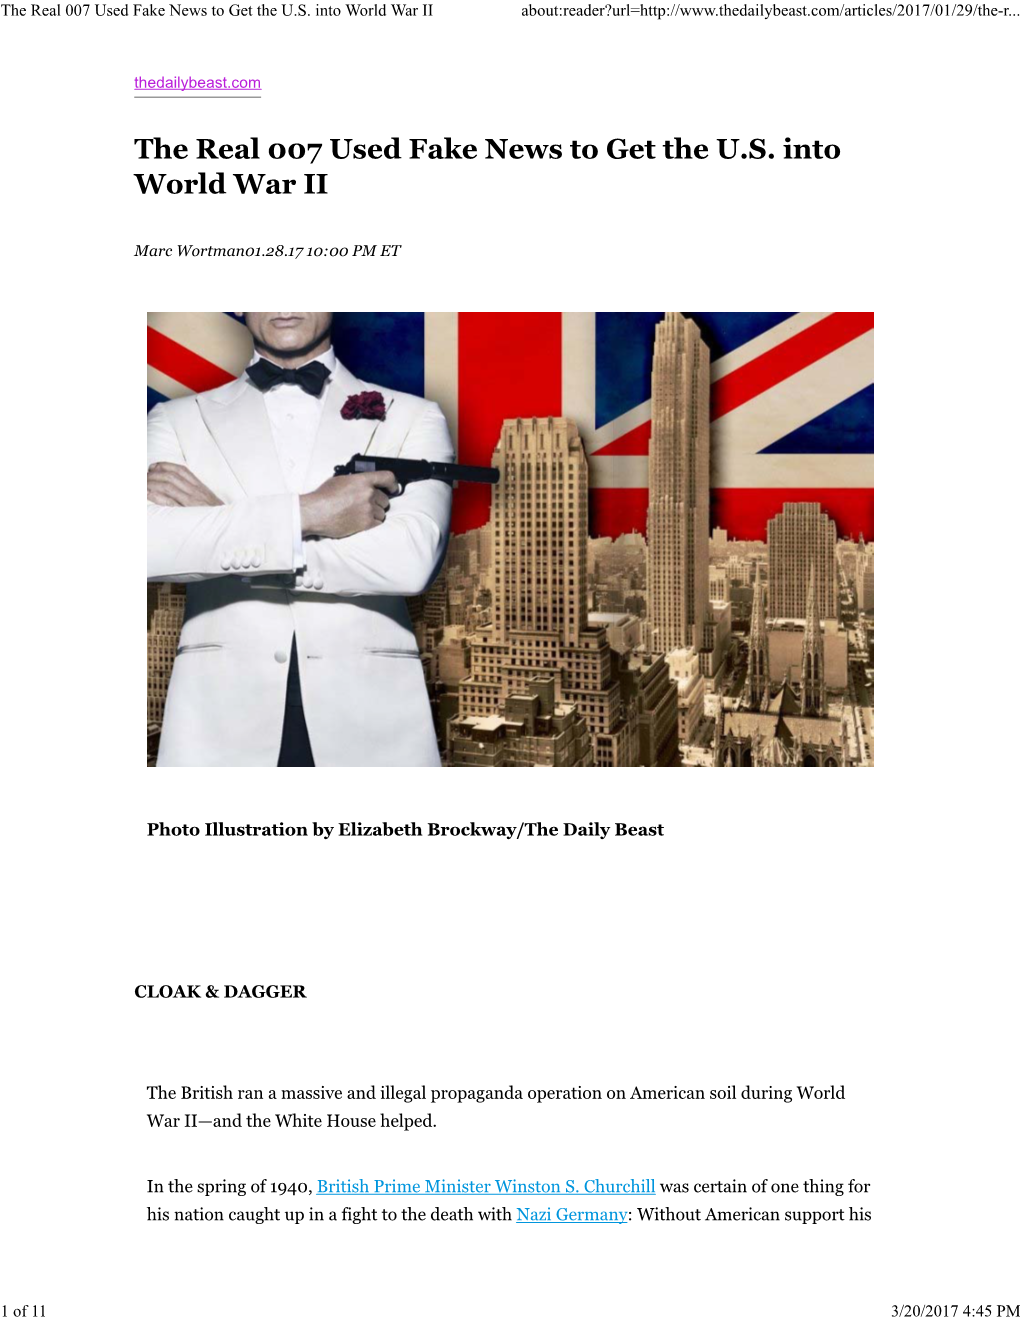 The Real 007 Used Fake News to Get the U.S. Into World War II About:Reader?Url=